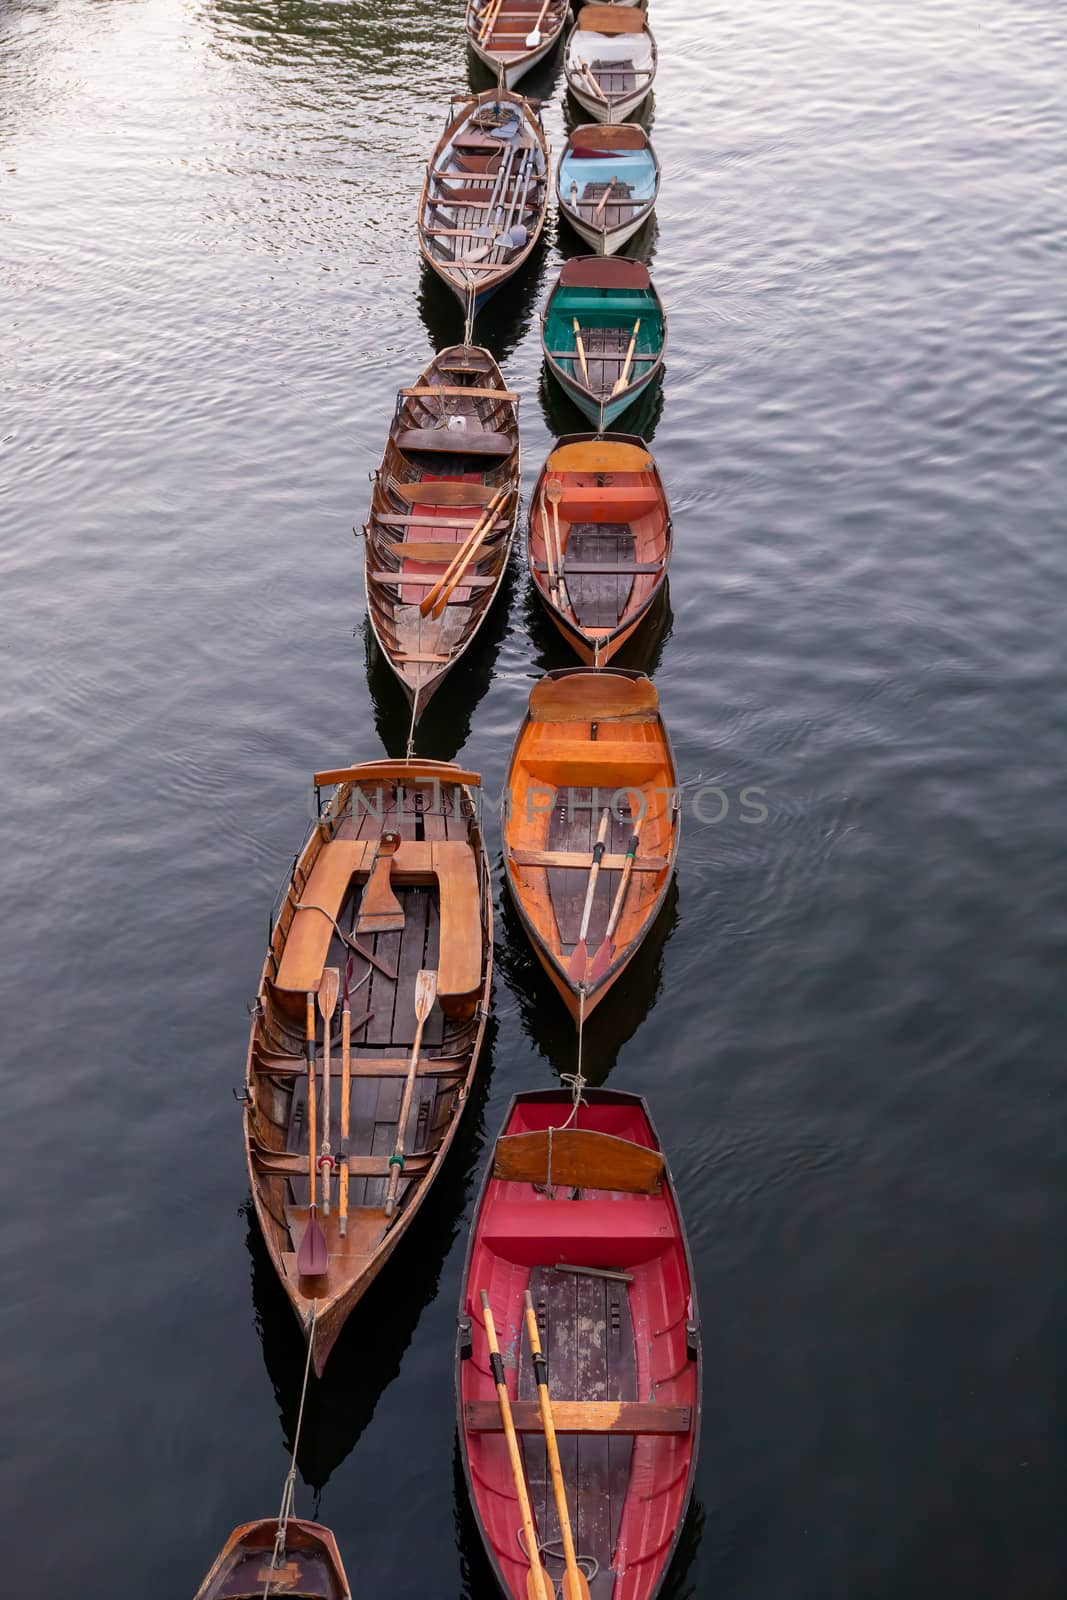 Wooden boats for hire moored on the River Thames, London by magicbones